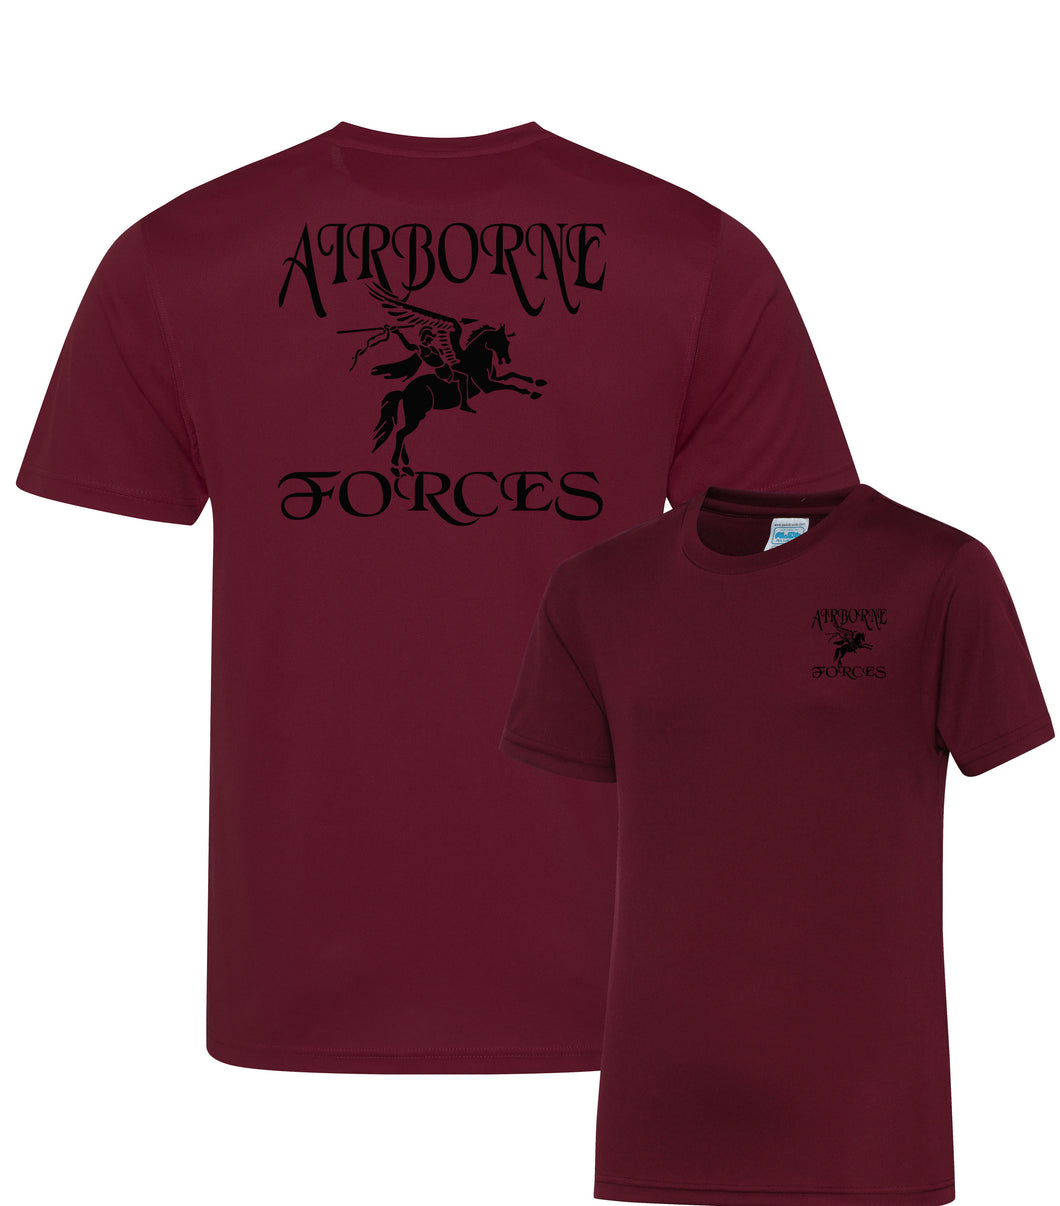 Airborne forces Paratrooper - Fully Printed Wicking Fabric T-shirt